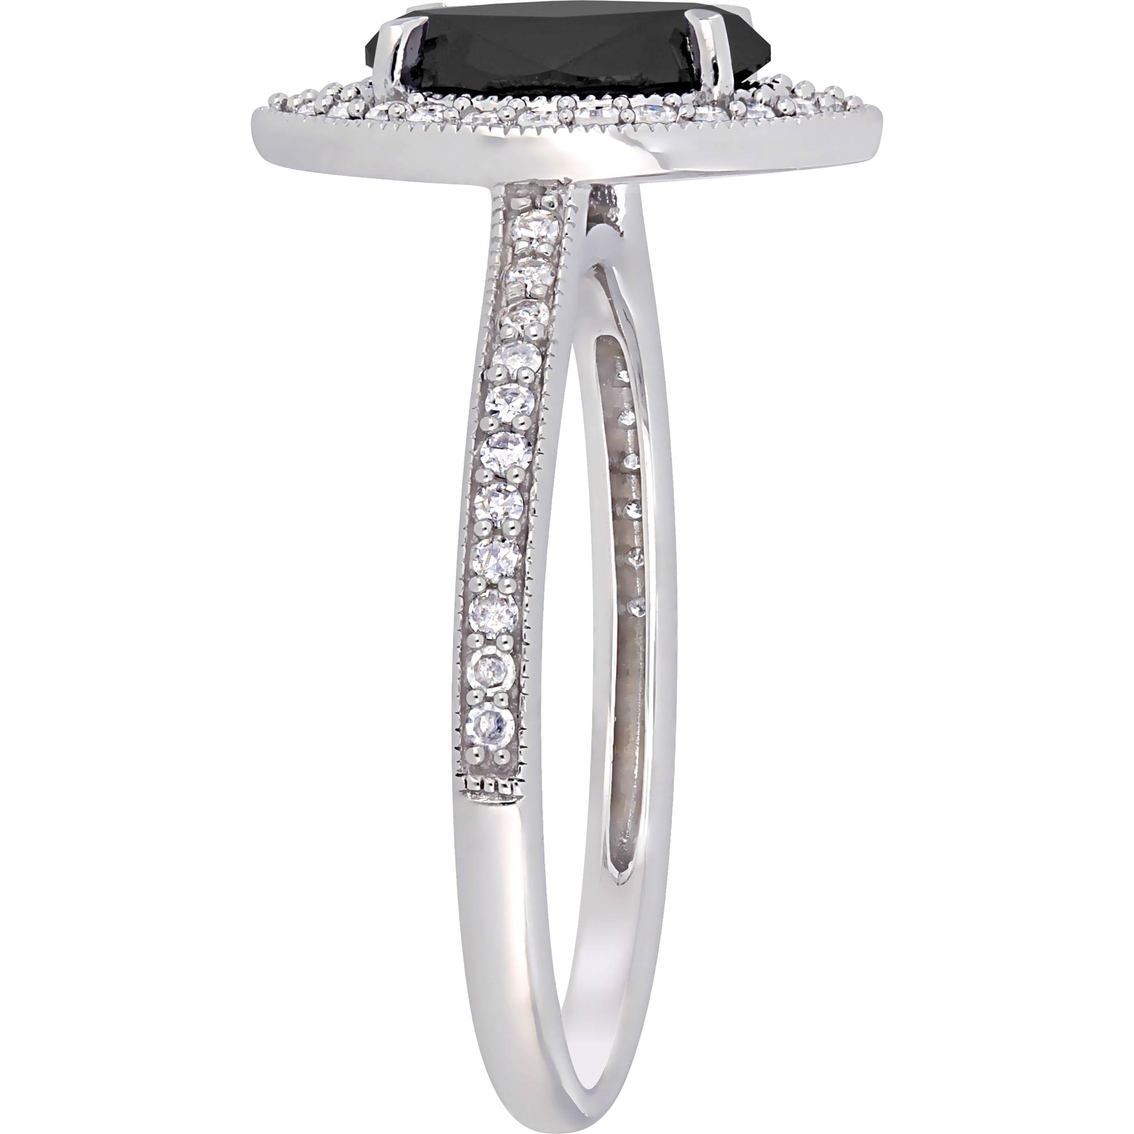 Diamore 10K White Gold 1 1/4 CTW Black and White Diamond Marquise Halo Ring - Image 2 of 4